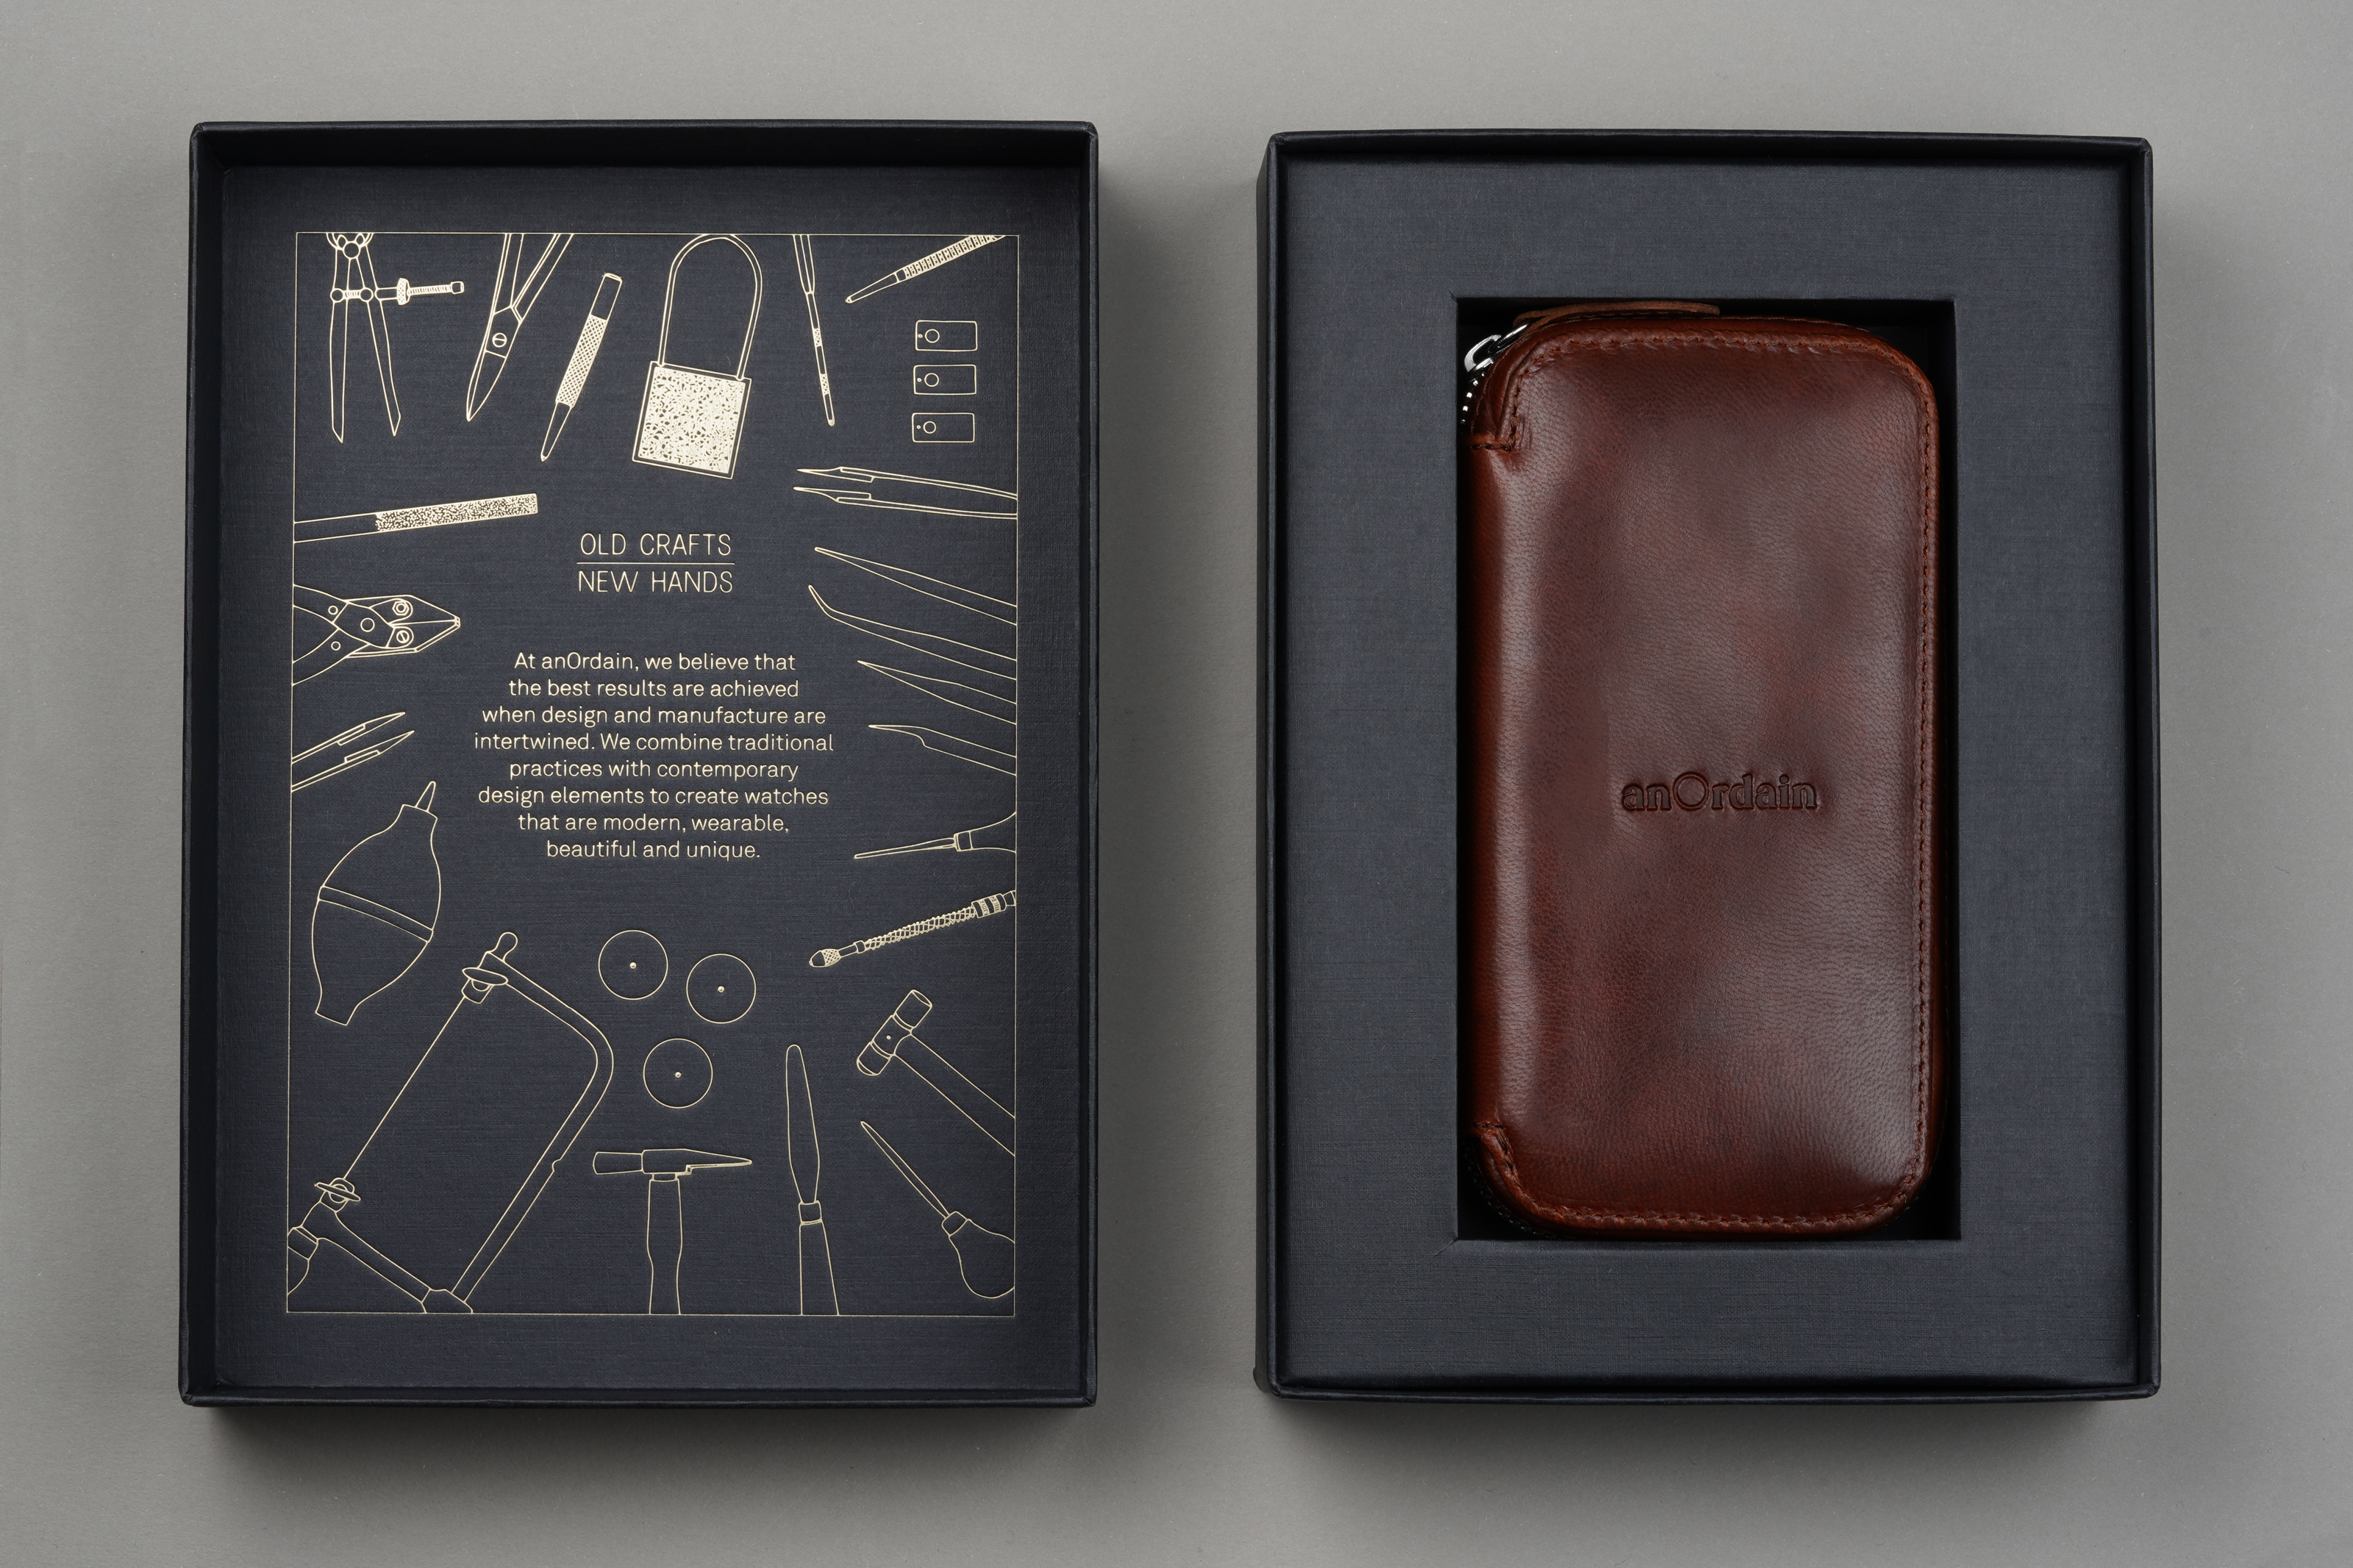 Luxury presentation packaging for AnOrdain